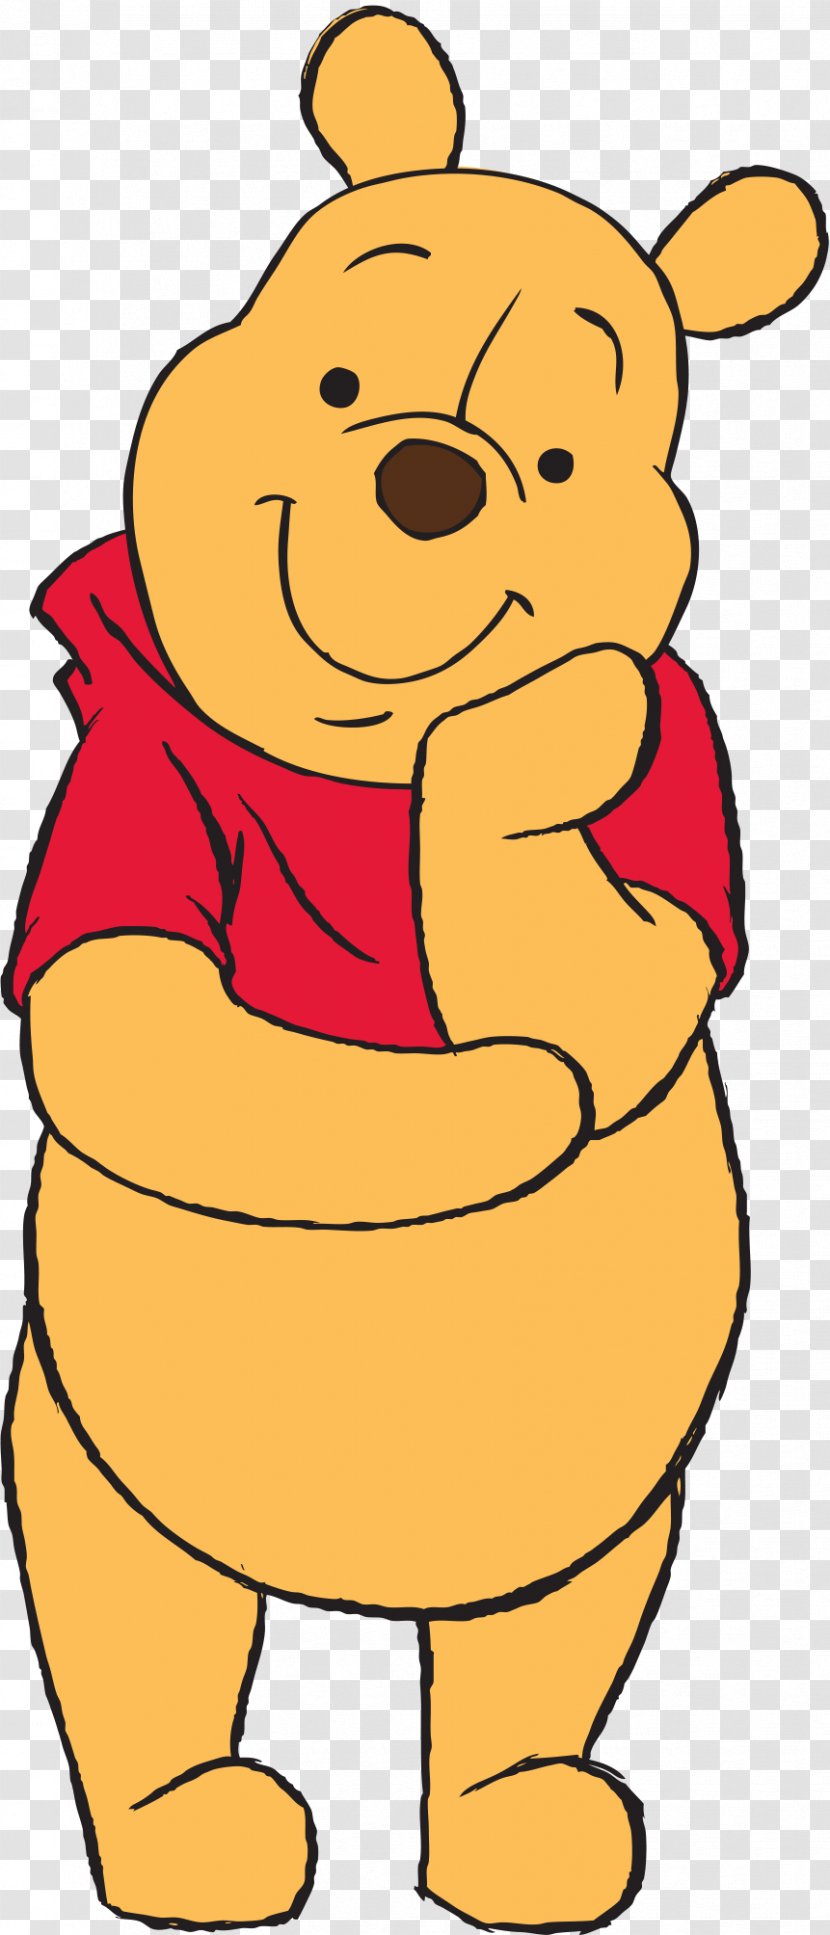 Piglet Mickey Mouse Winnie-the-Pooh Winnie The Pooh Minnie - Frame Transparent PNG